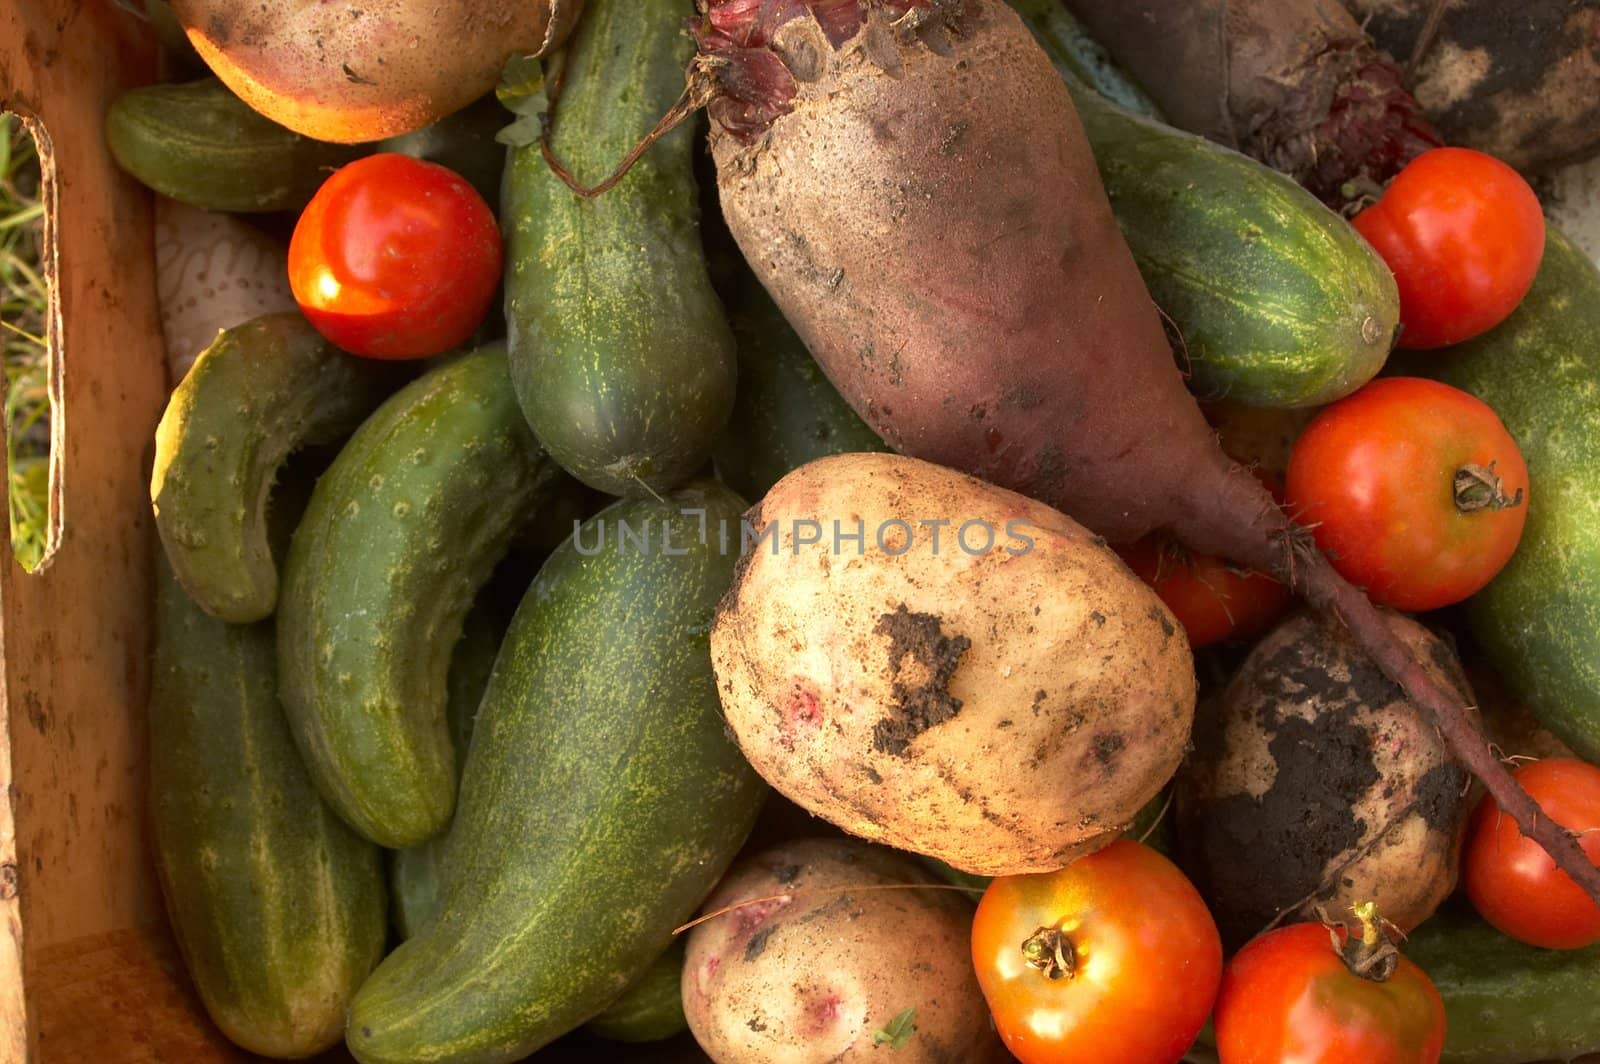 Different vegetables (beetroot, potato, tomatoes, cucumbers)